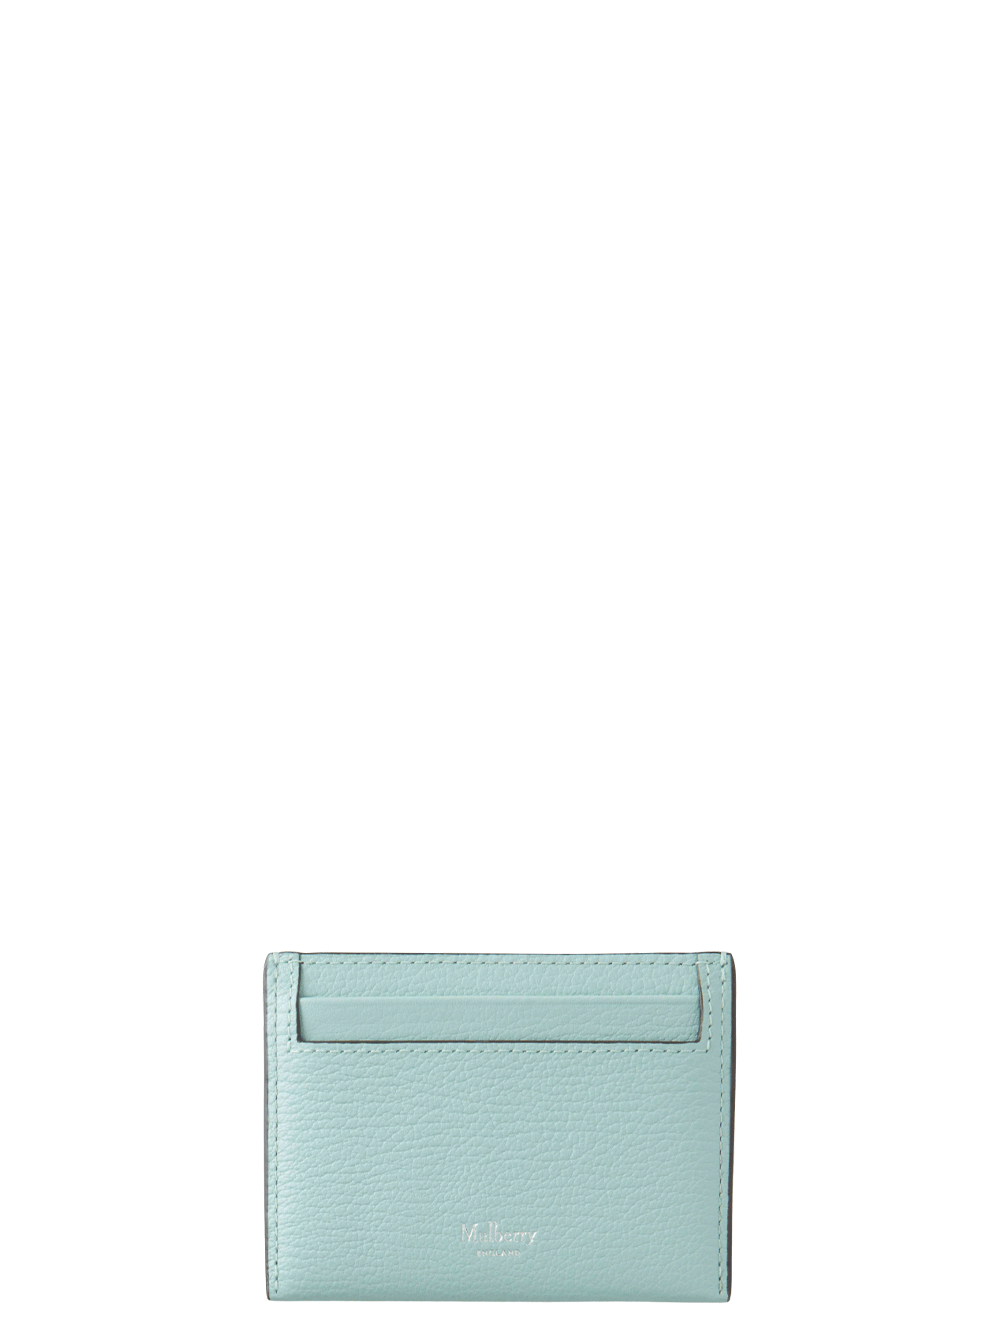 Continental-Credit-Card-Slipprinted-Goat-Turquoise-1